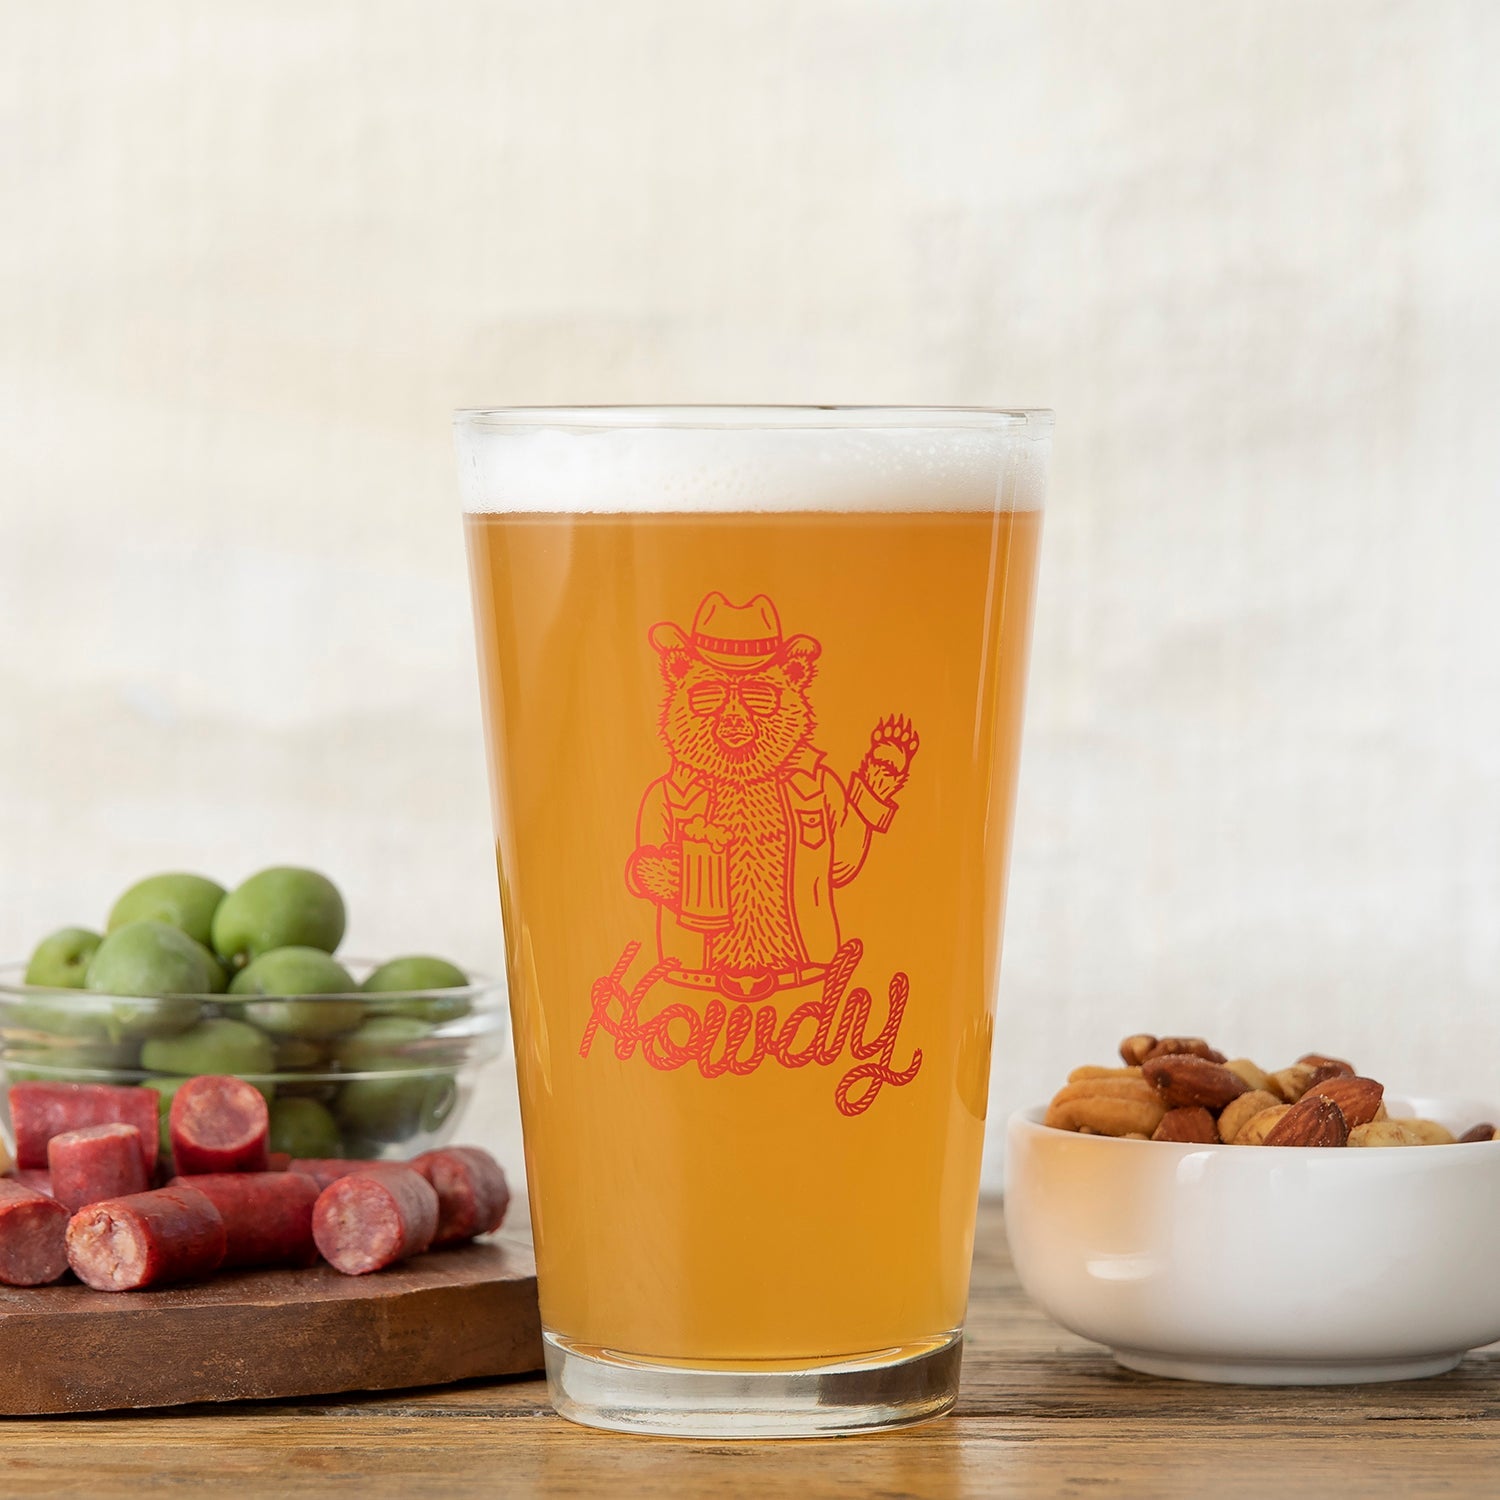 Pint Glass Don't Worry Drink Hoppy Craft Beer Glass 